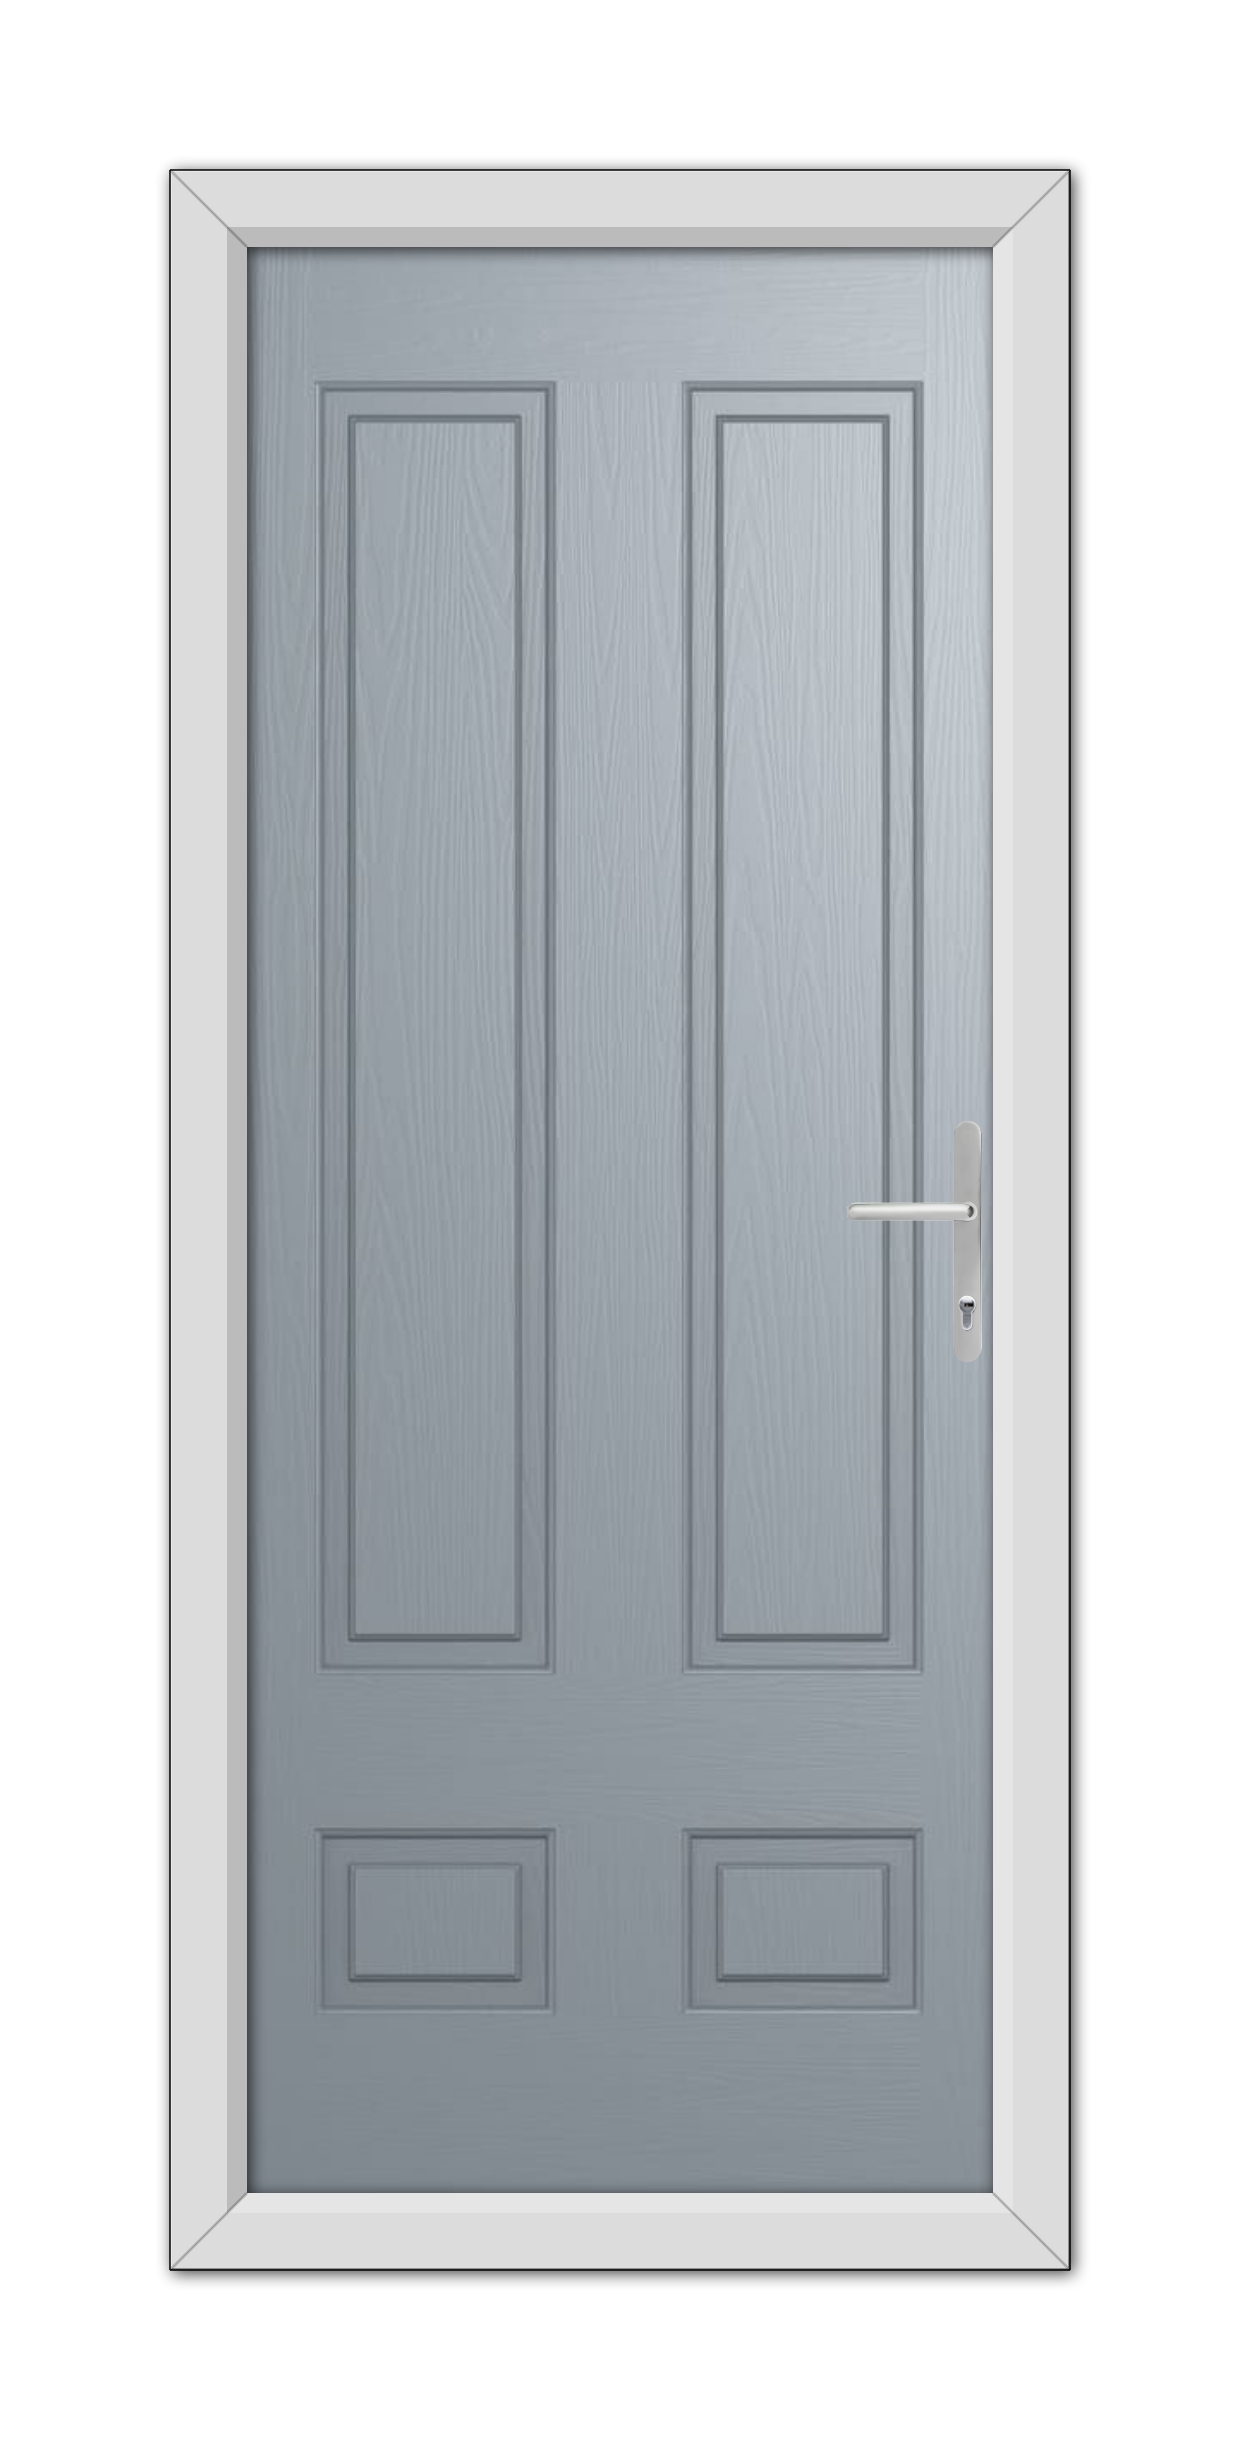 A modern French Grey Aston Solid Composite Door 48mm Timber Core with a silver handle, set within a white door frame, shown in a frontal view.